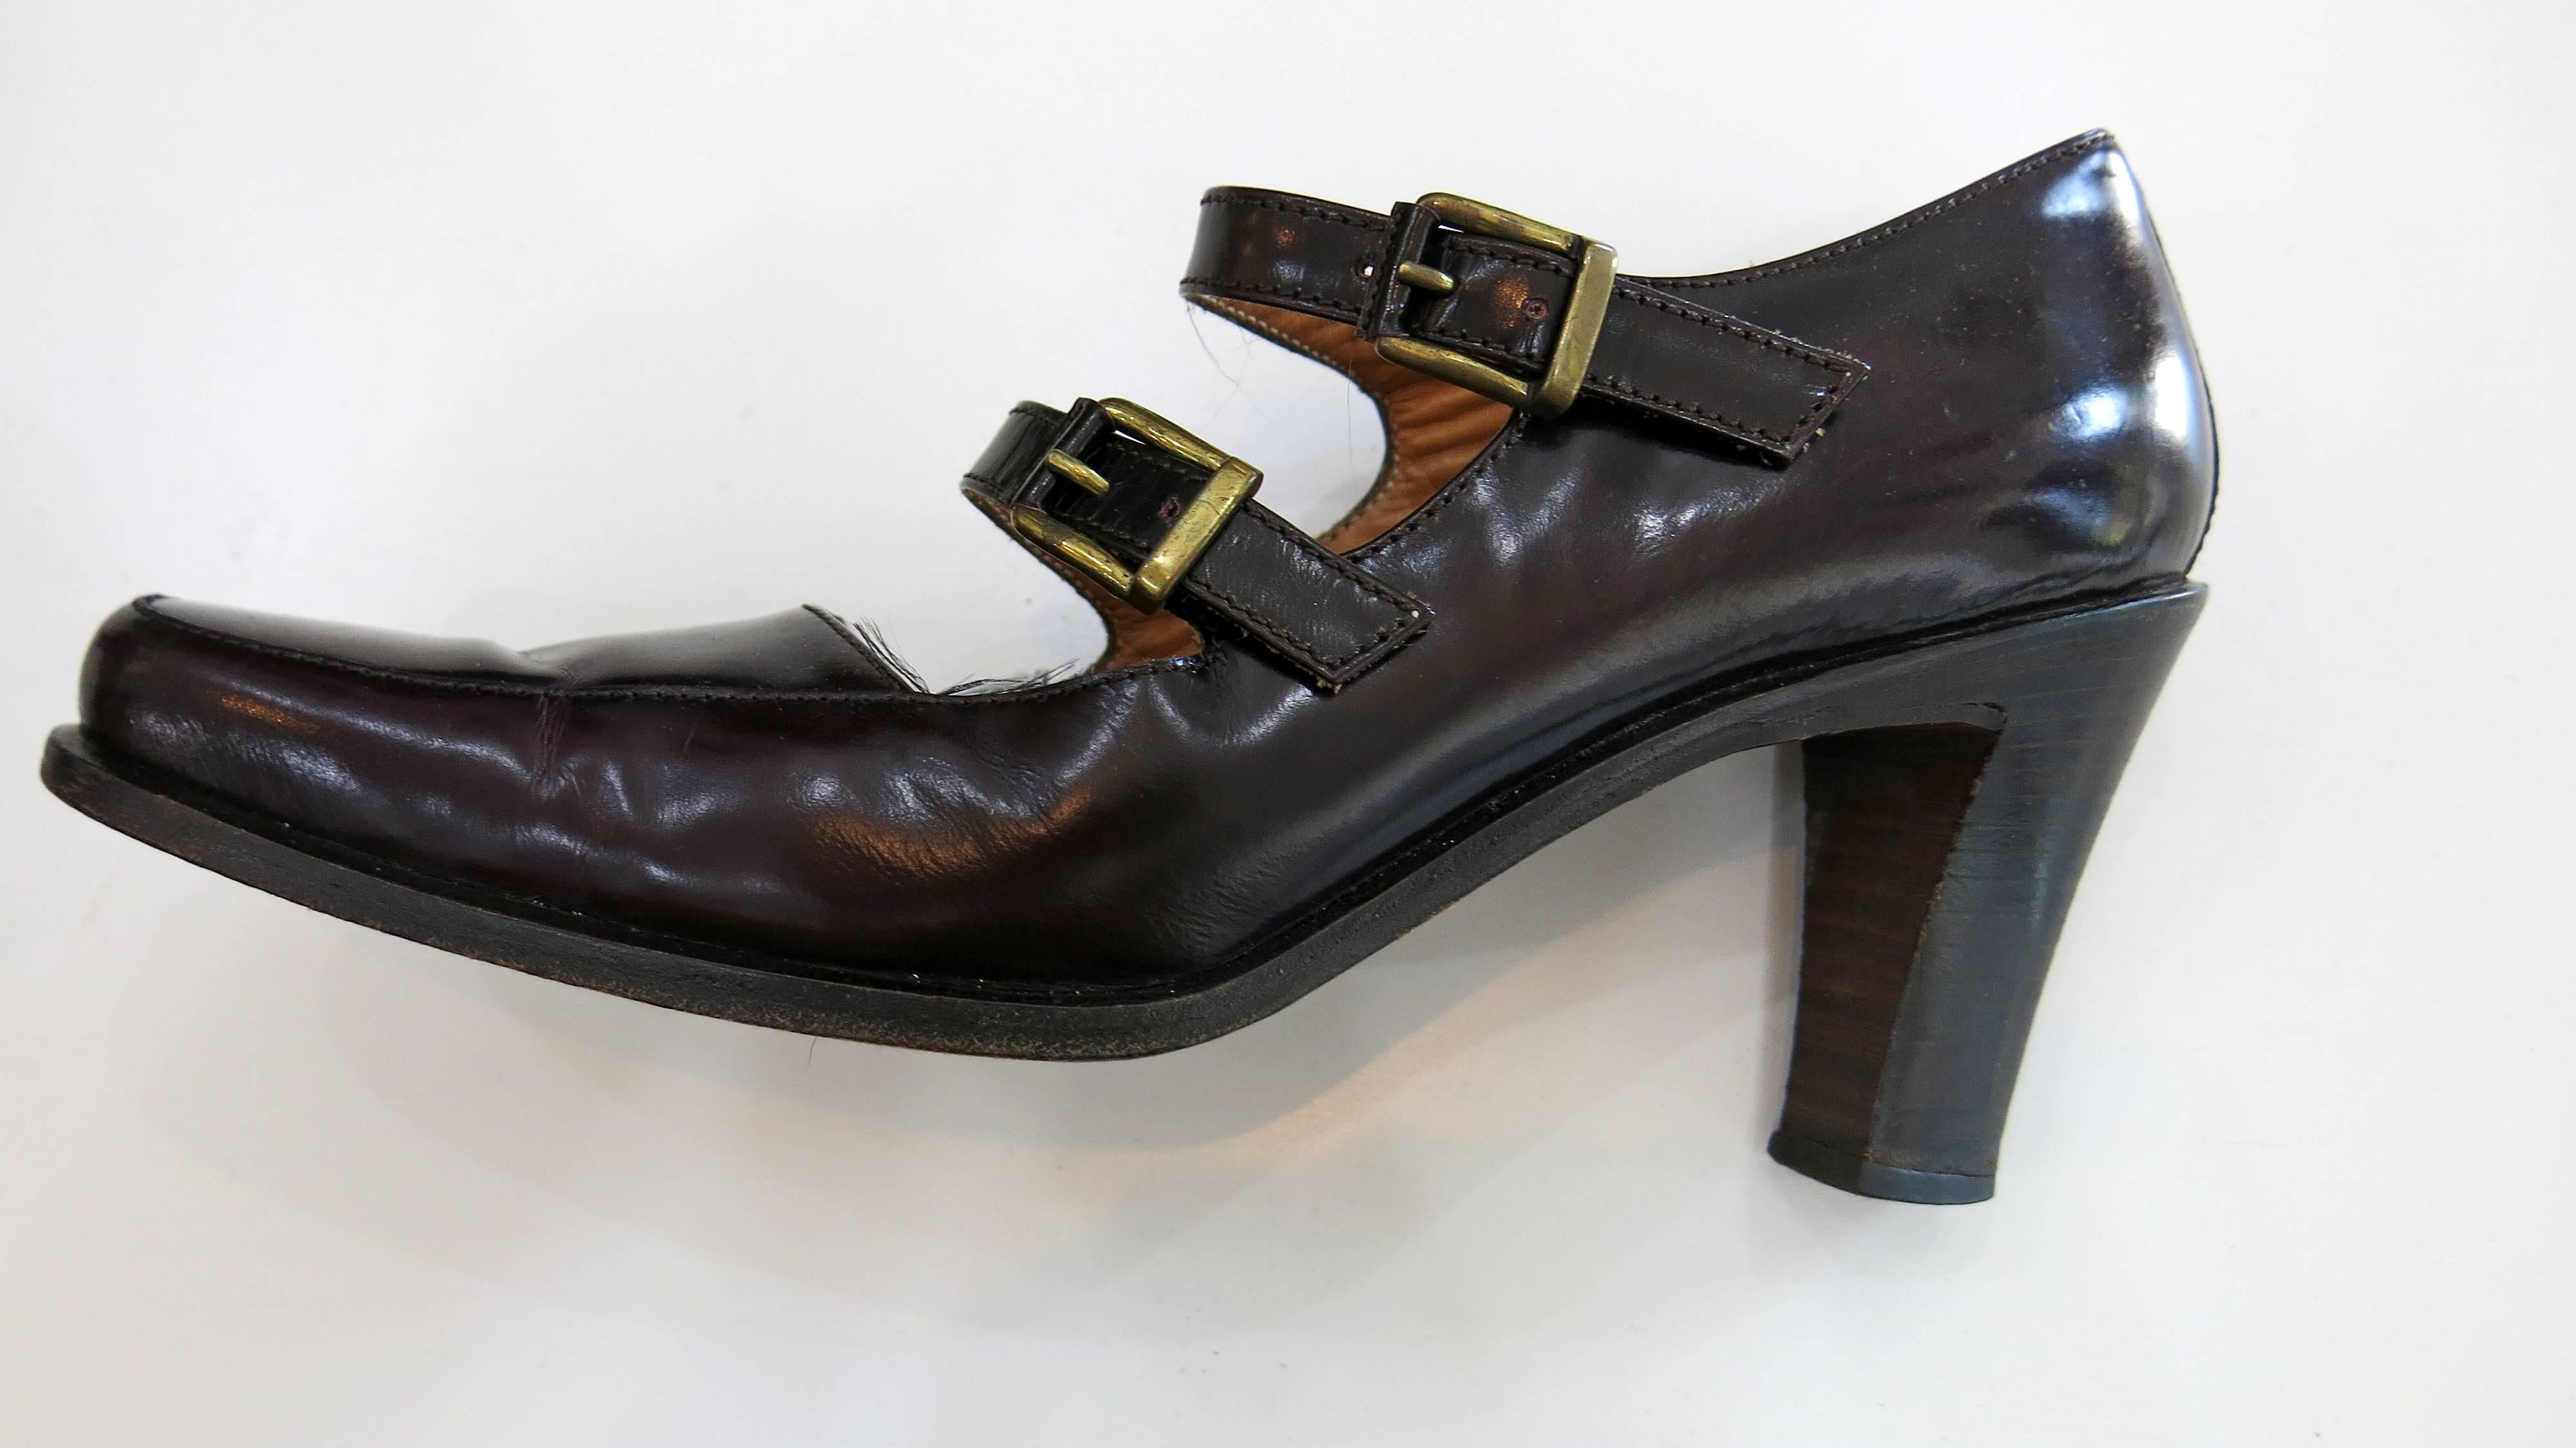 Dark reddish brown leather Mary Jane style heels with double buckled straps and a three inch heel. Some minimal creasing in the leather at the front of the shoe by the toes as a result of usage and age. Can be dressed up or down and will go with